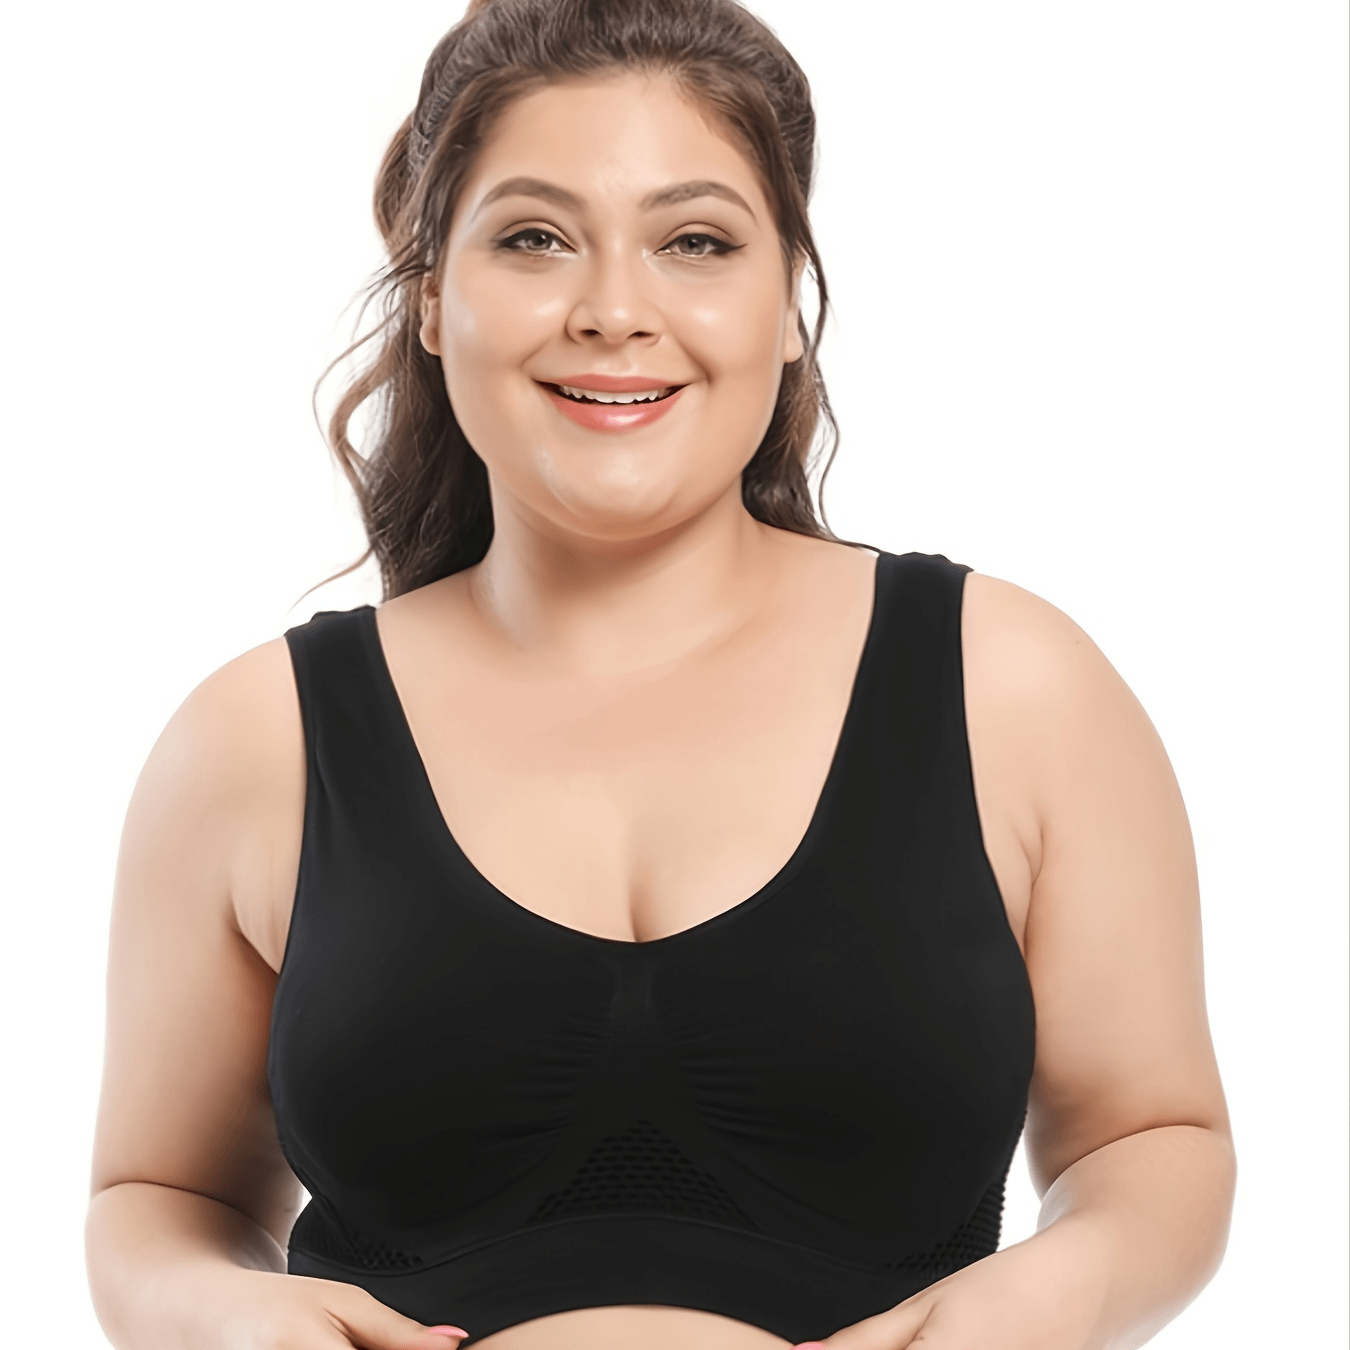 Plus Size Sports Bra for Women - Easy Access Lingerie Nude Strapless Dance  Bra Lace Sports Bra Sets Sport Bra Removable Pad Gym Top Women Crop Support